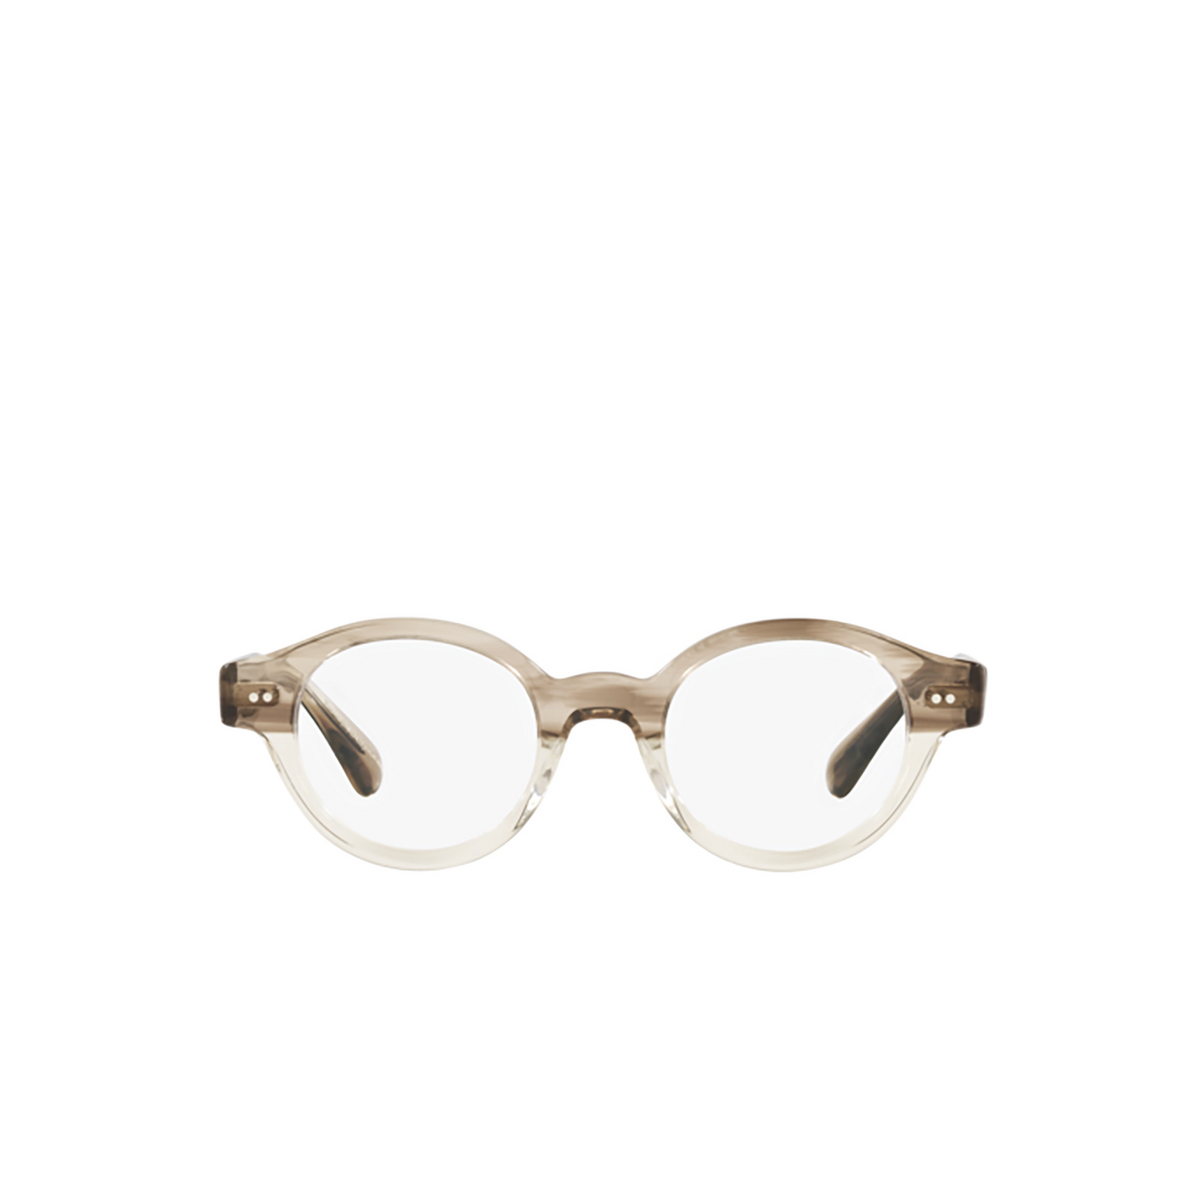 Oliver Peoples LONDELL Eyeglasses 1647 Military vsb - front view